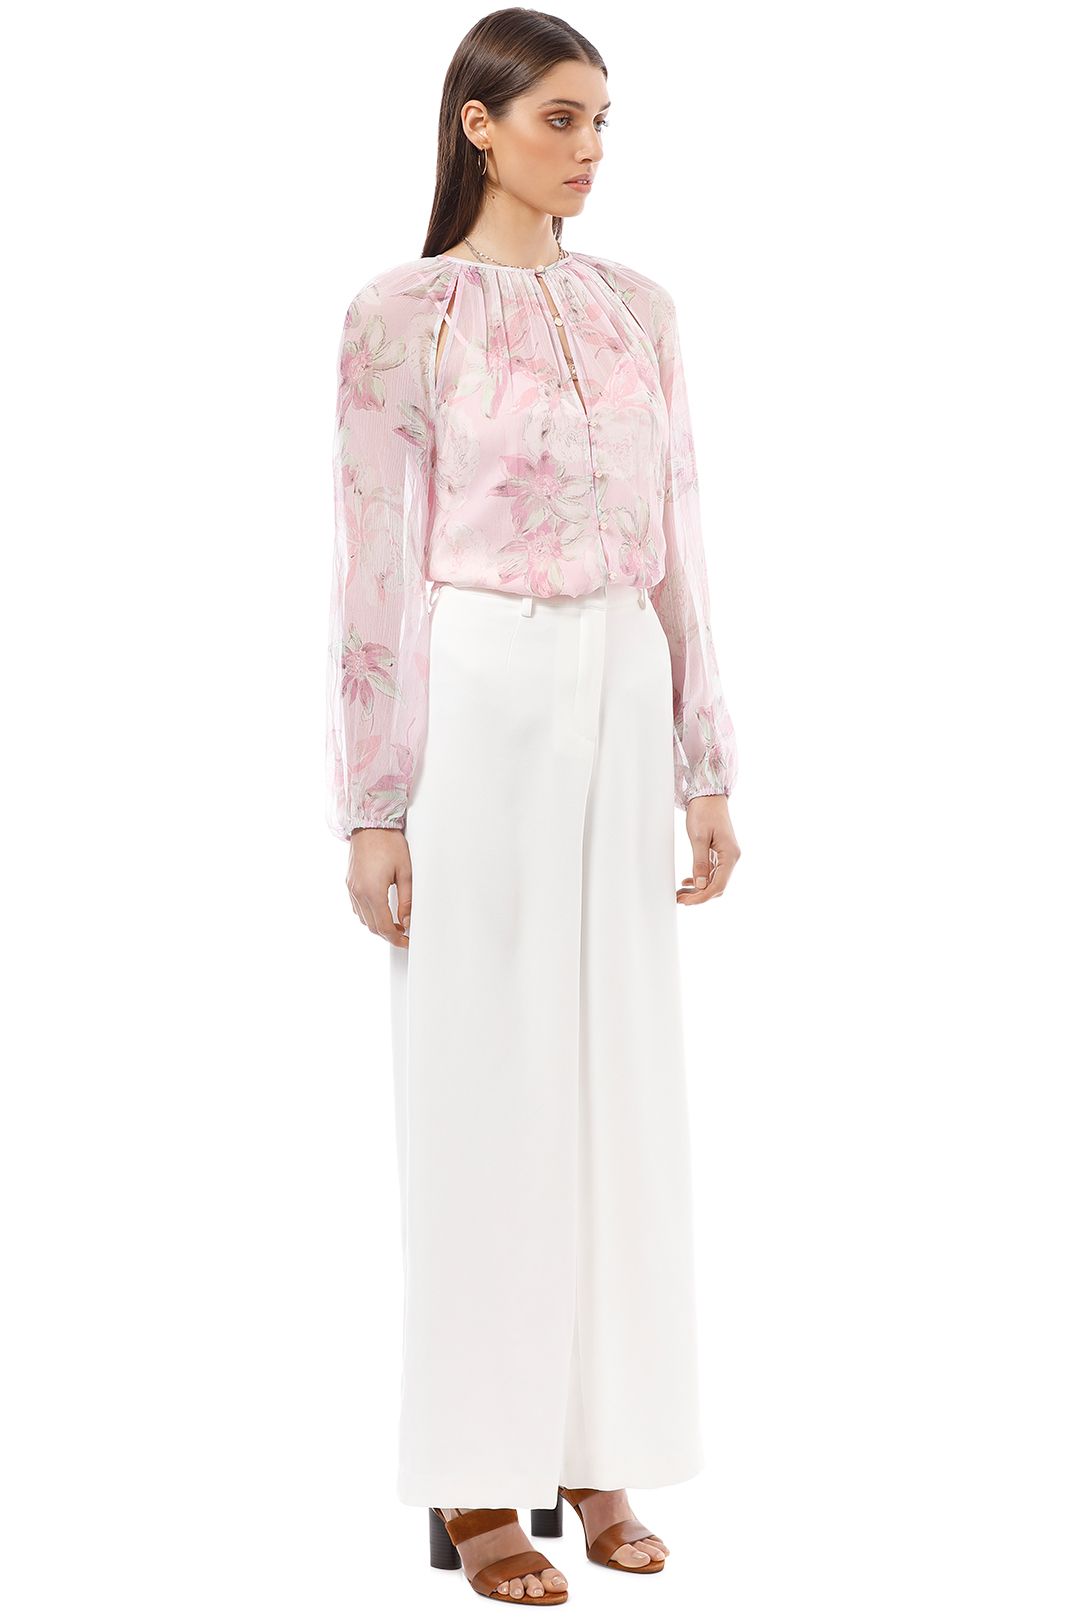 Alice McCall - Watercolour Floral Blouse - Pink Print - Side